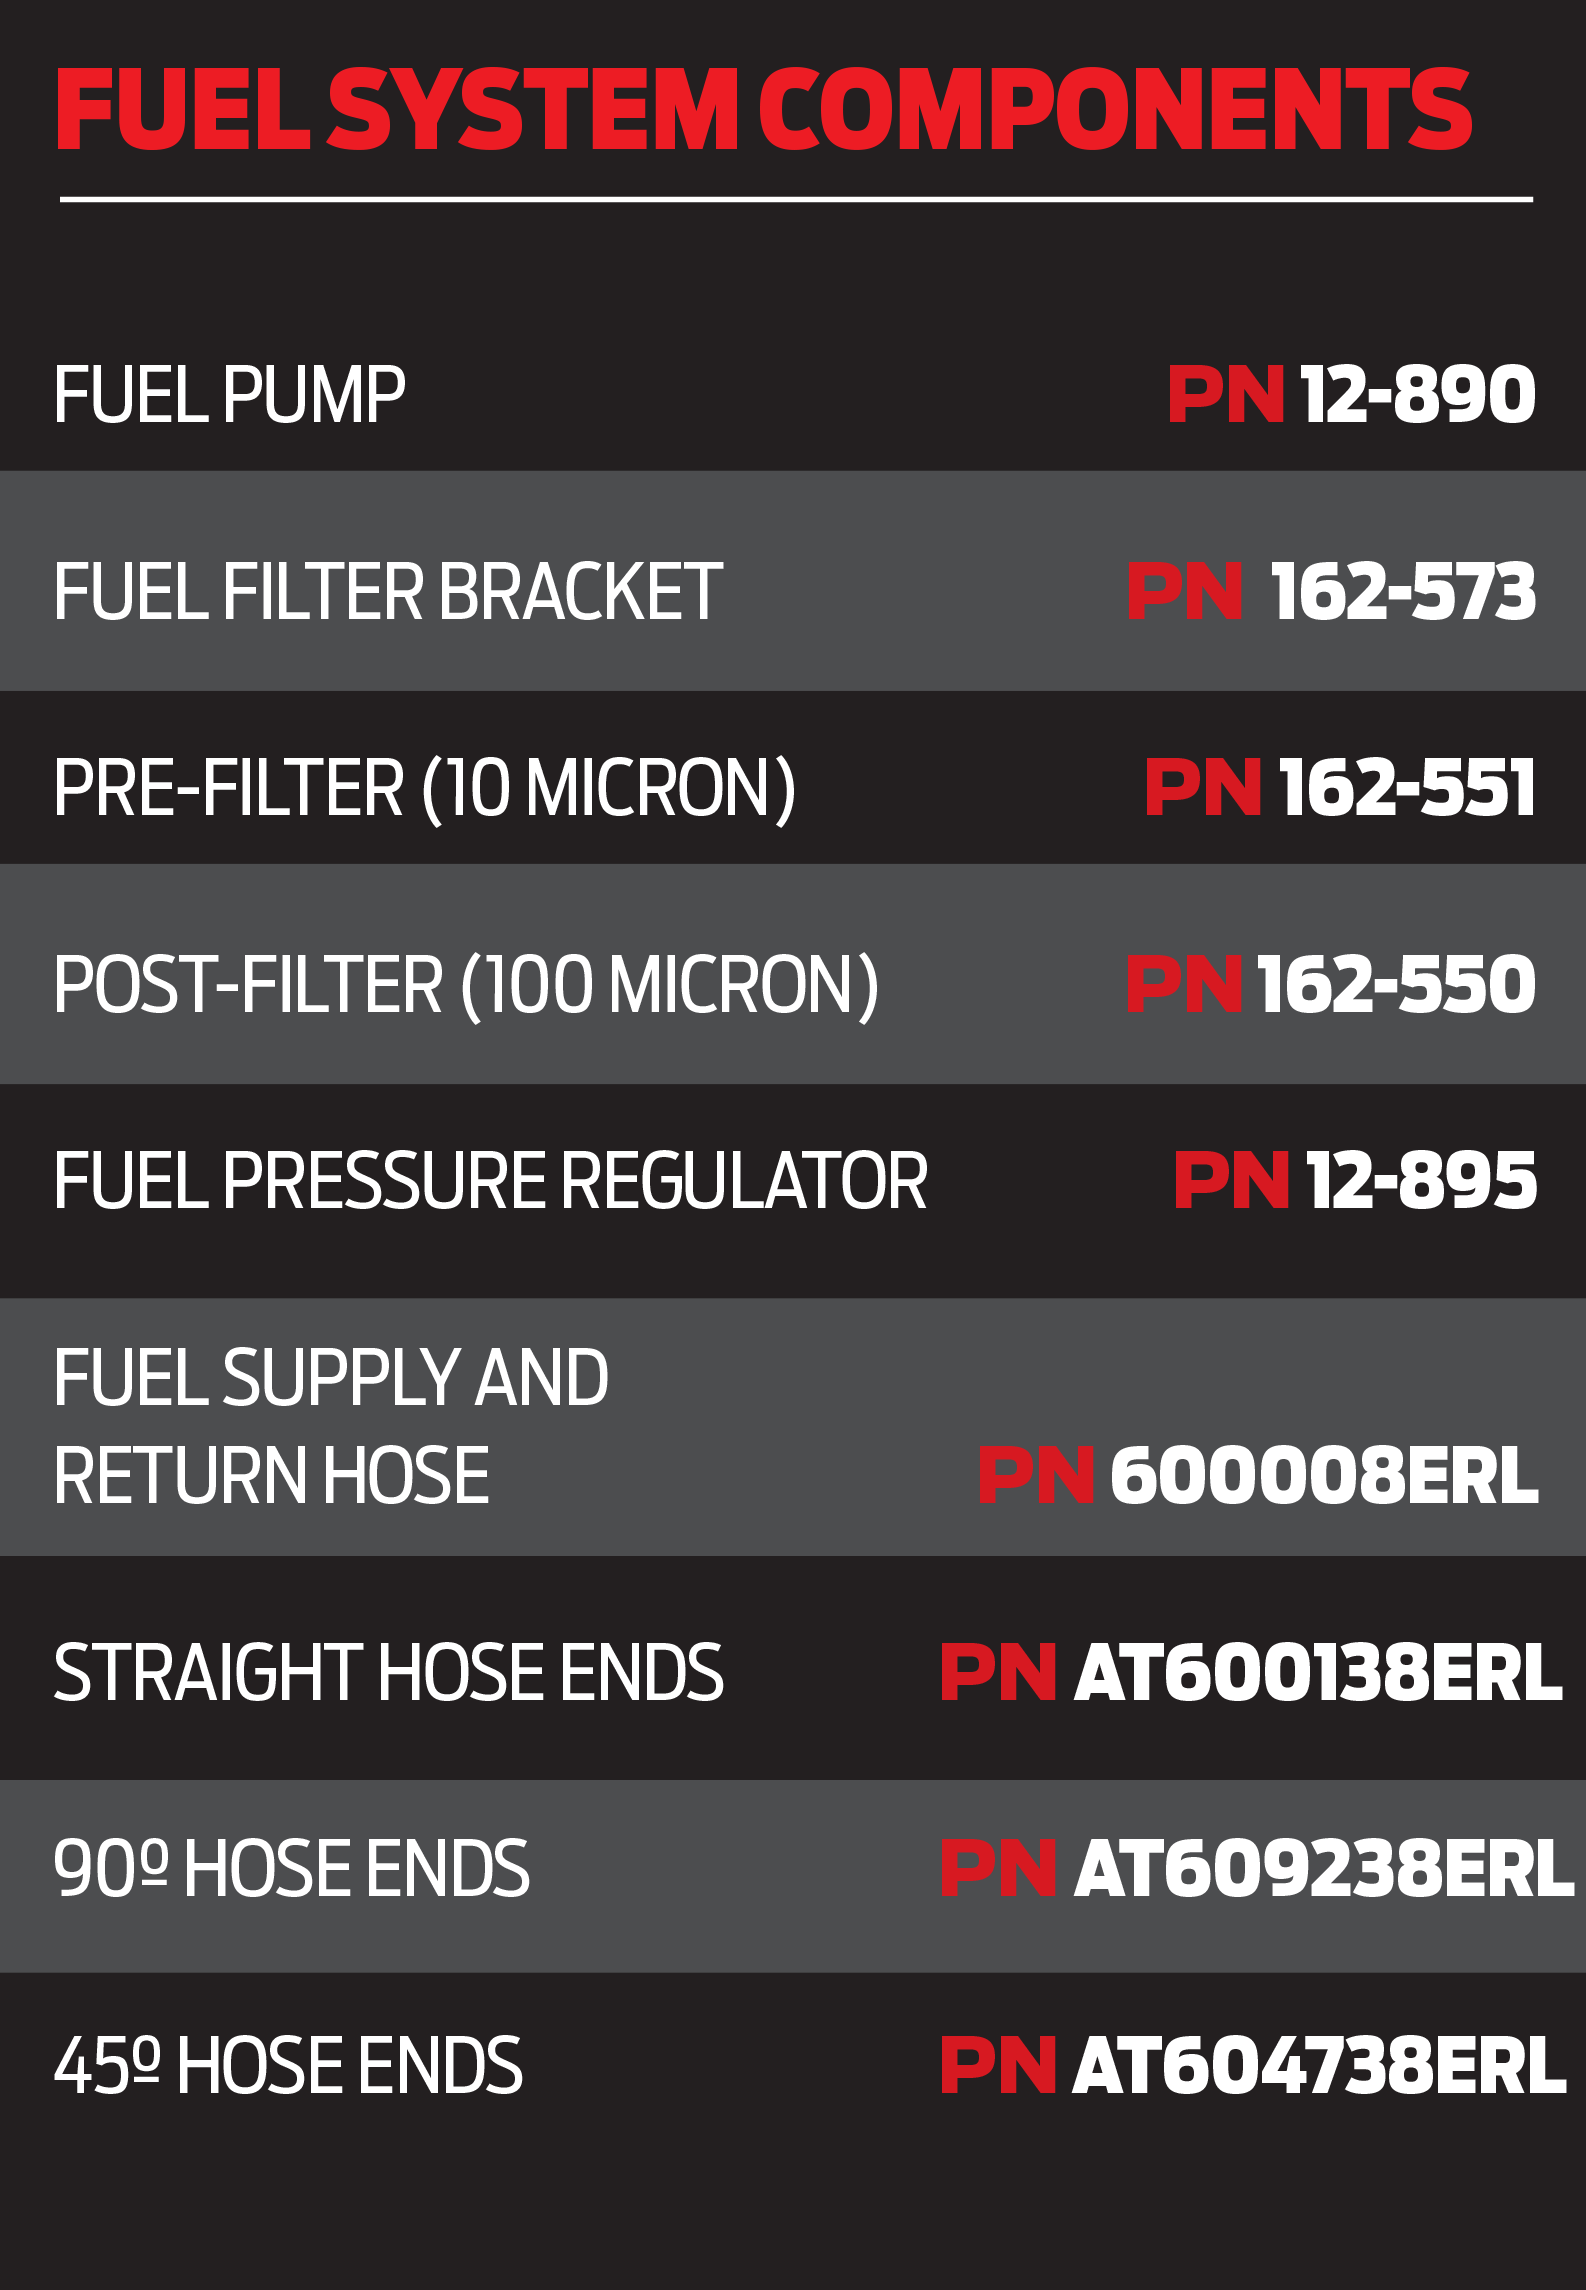 List of used fuel components